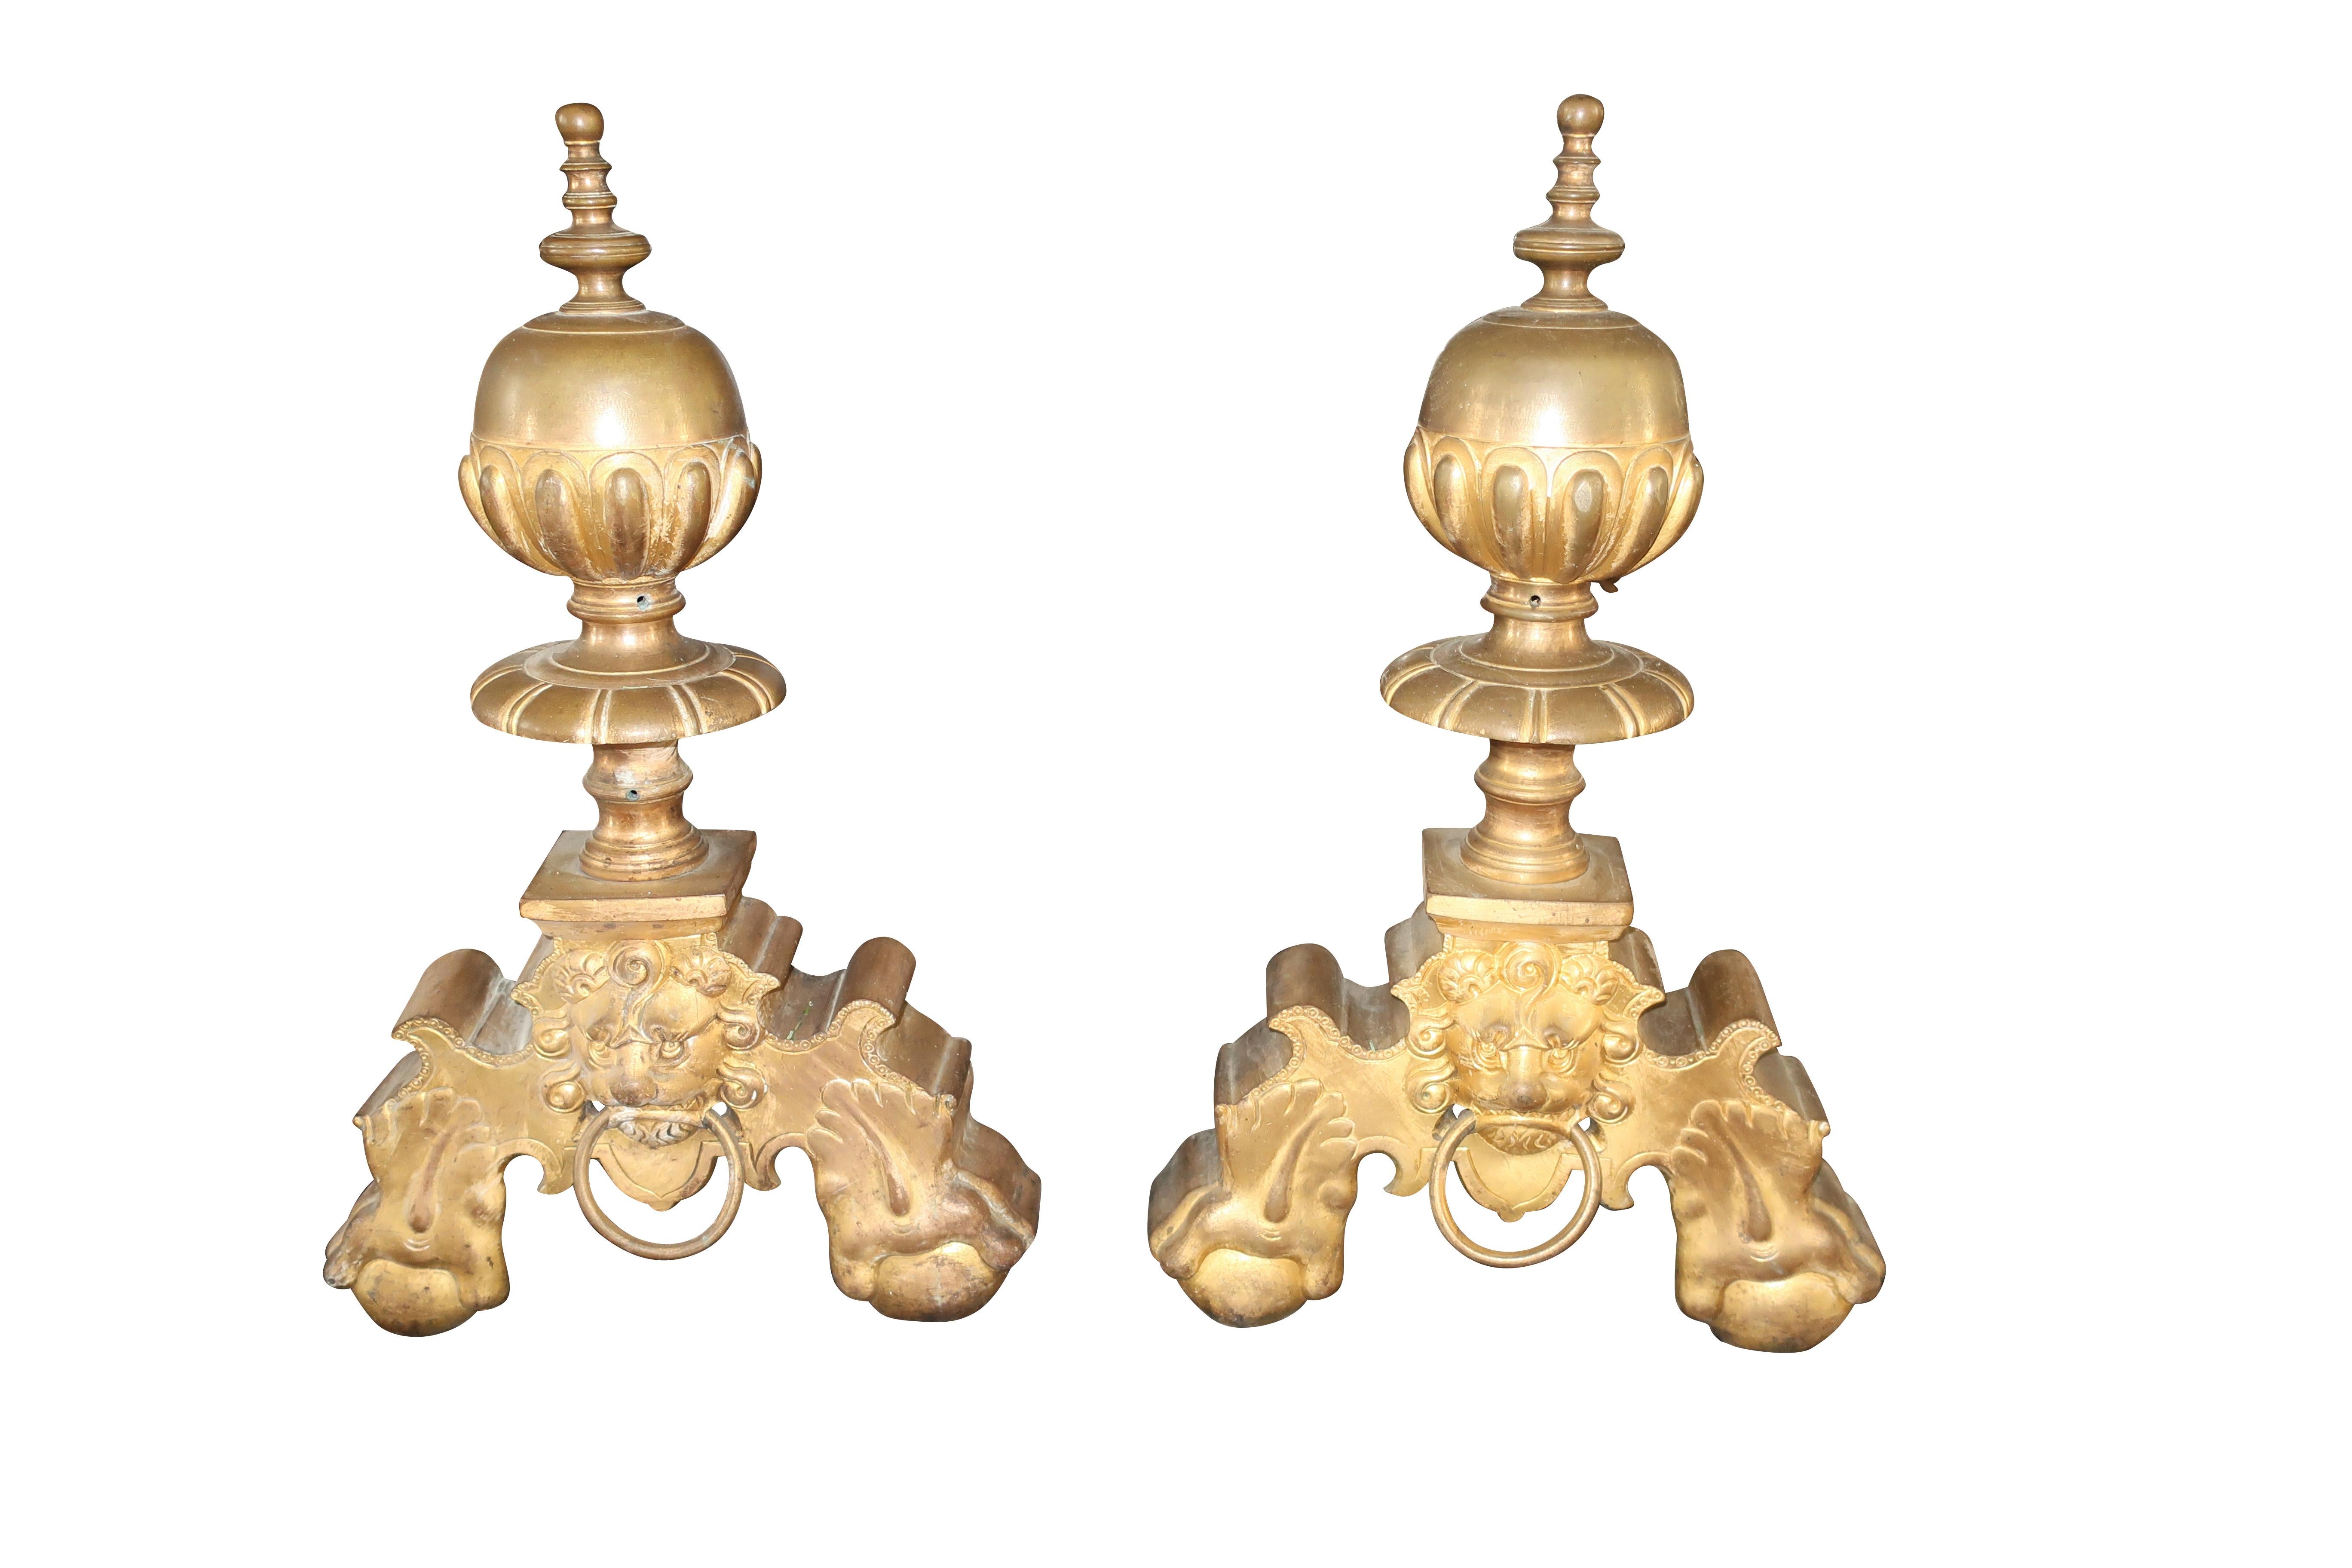 This exquisite pair of antique chenets/ andirons are made in France in the late 19th century. Created in a lustrous doré bronze, they feature lion head designs. The design adorns the center panel between the two legs. Excellent condition.